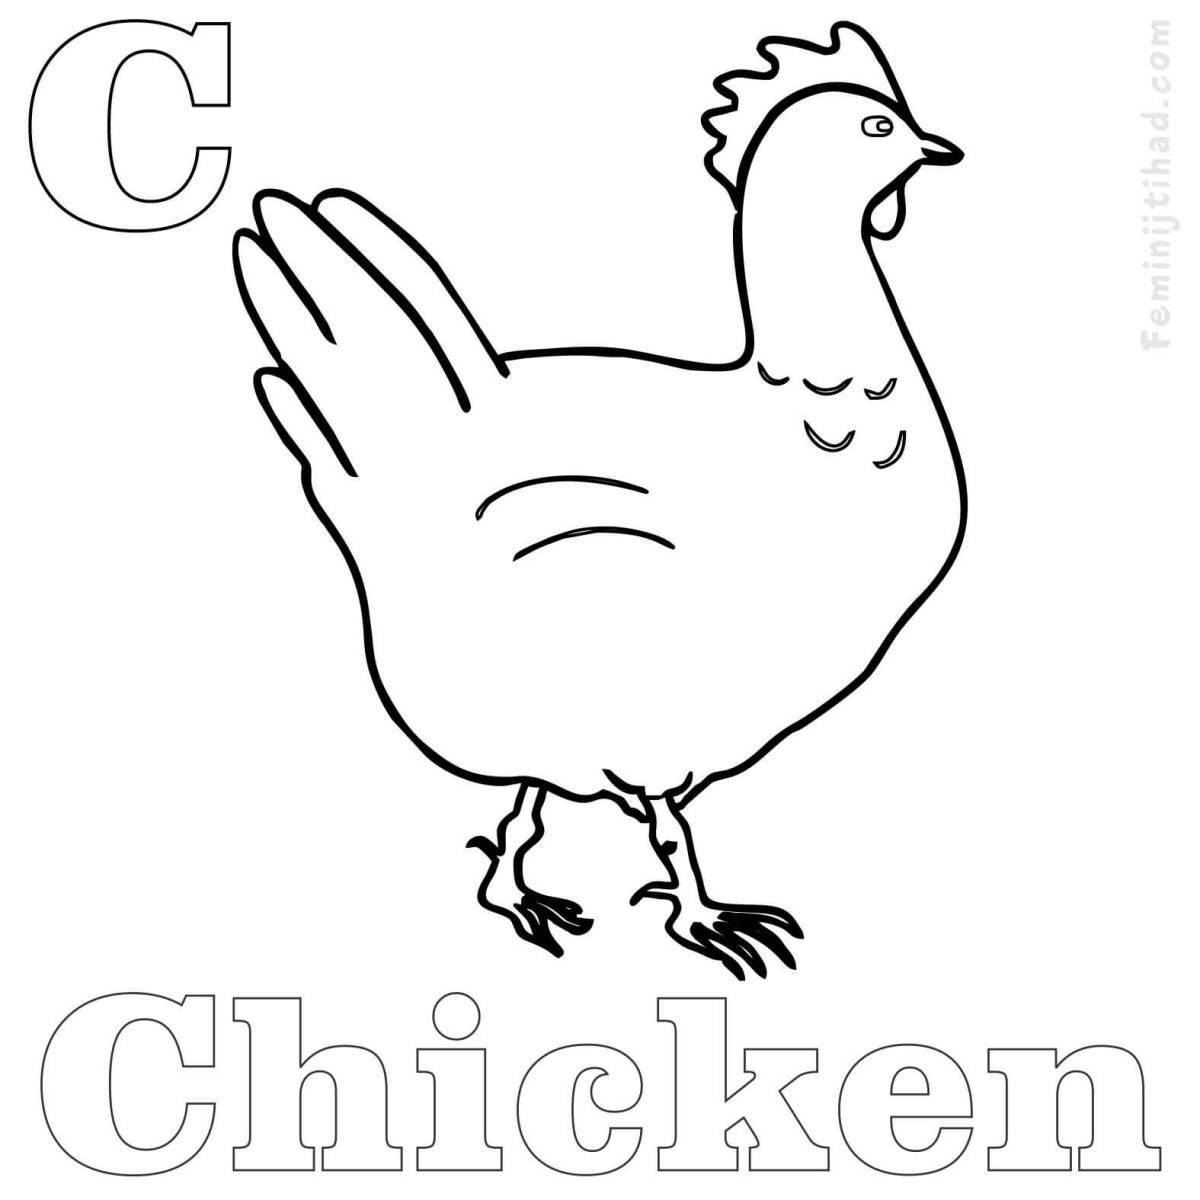 Coloring page adorable chicken ghana